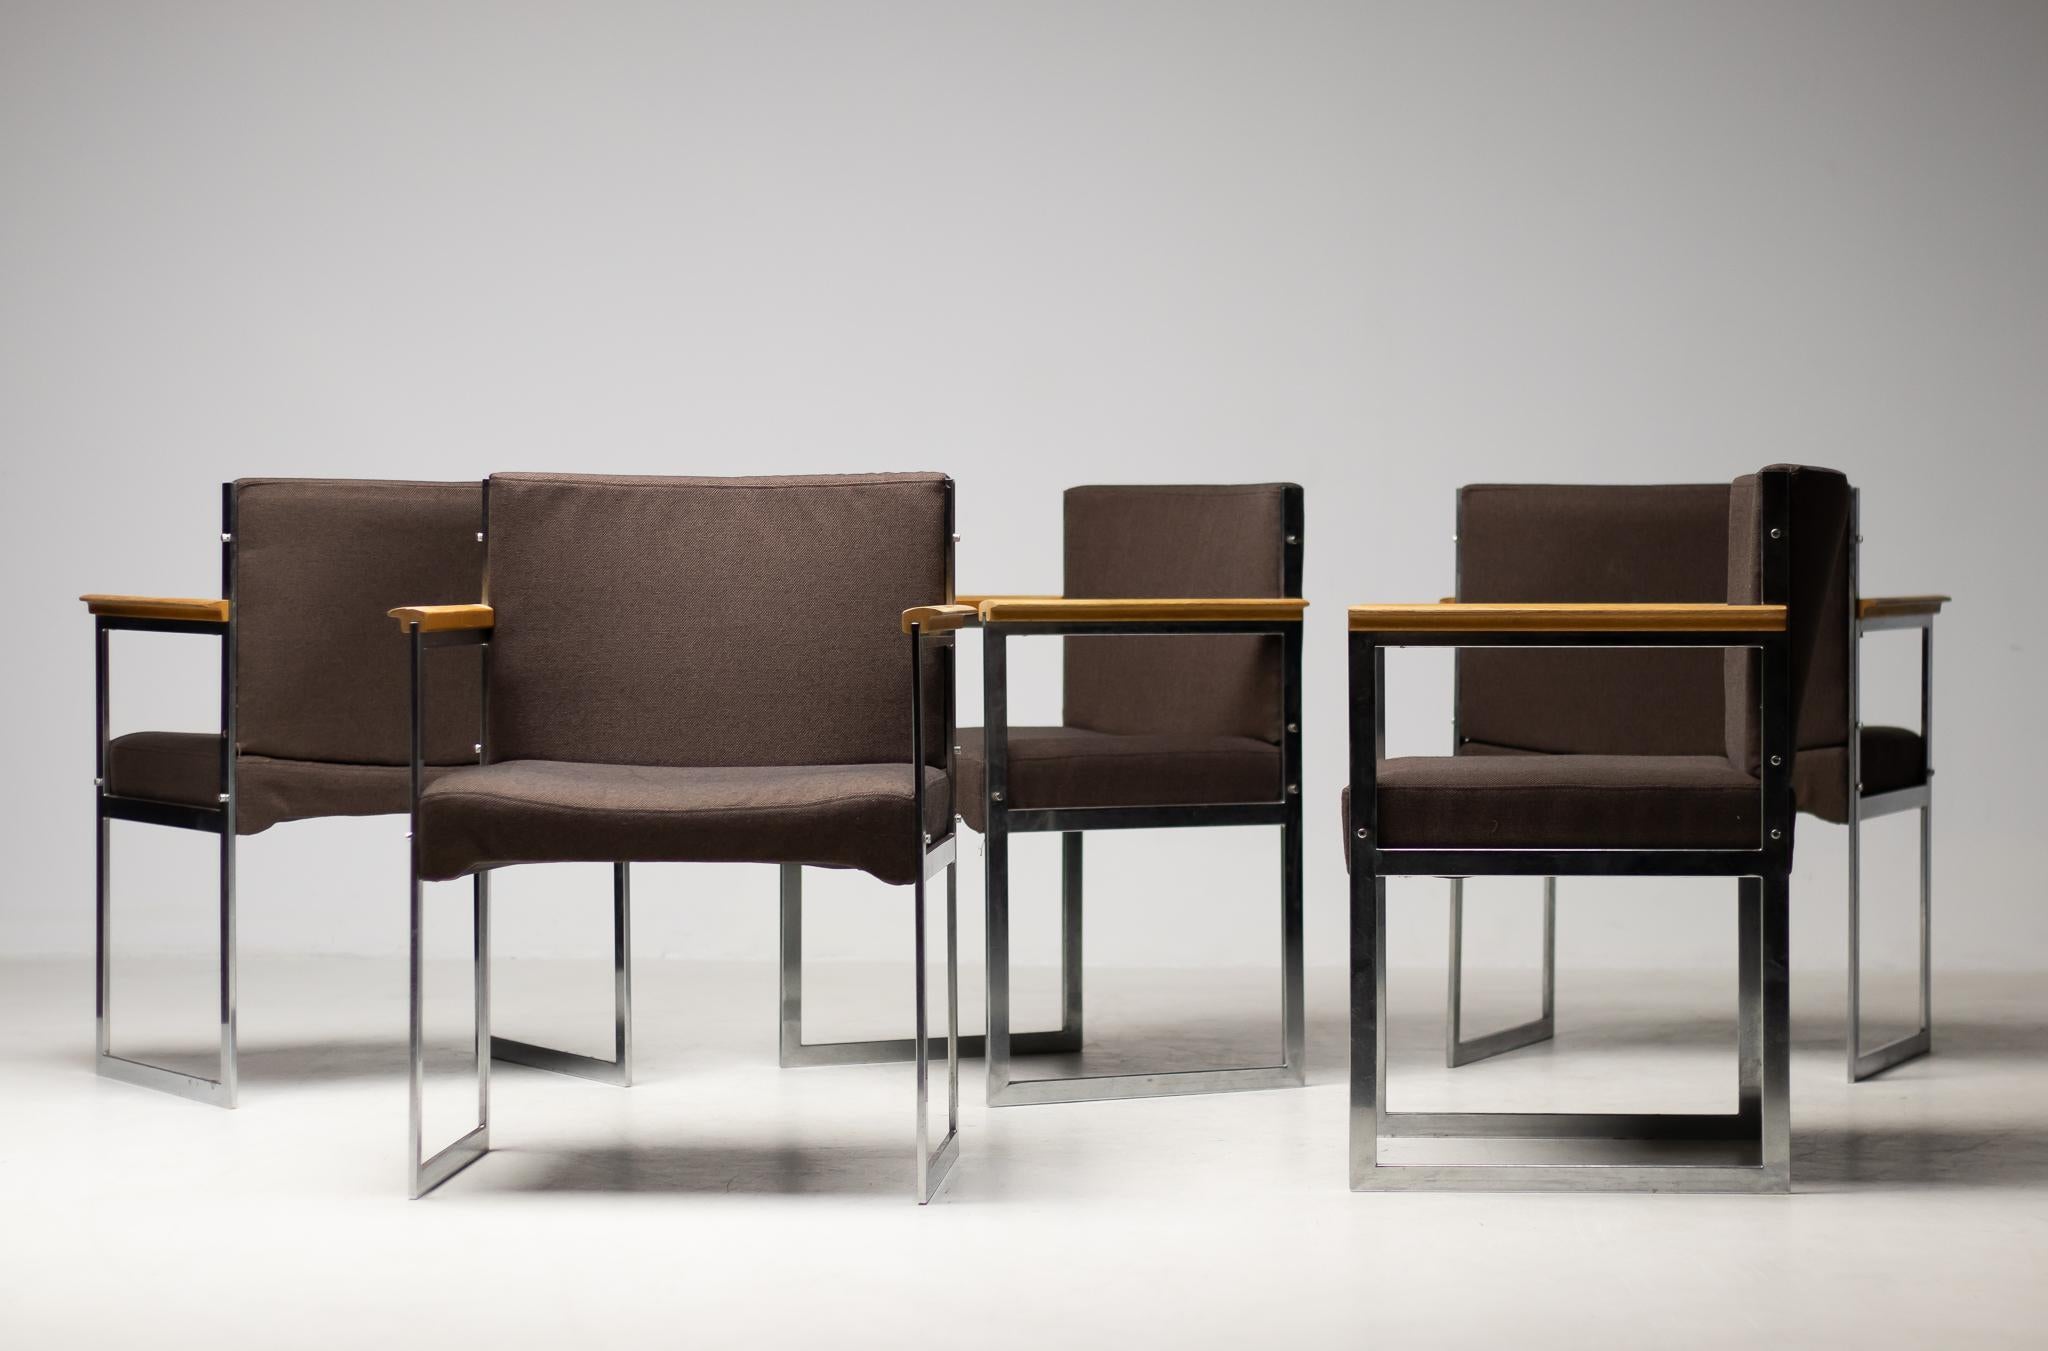 Distinguished armchairs with chromed flat steel frame and armrests in rosewood, designed by Illum Wikkelsø.
Seat and back in brown wool, re-upholstery available upon request.
Five chairs available, priced individually.
Manufactured by P.